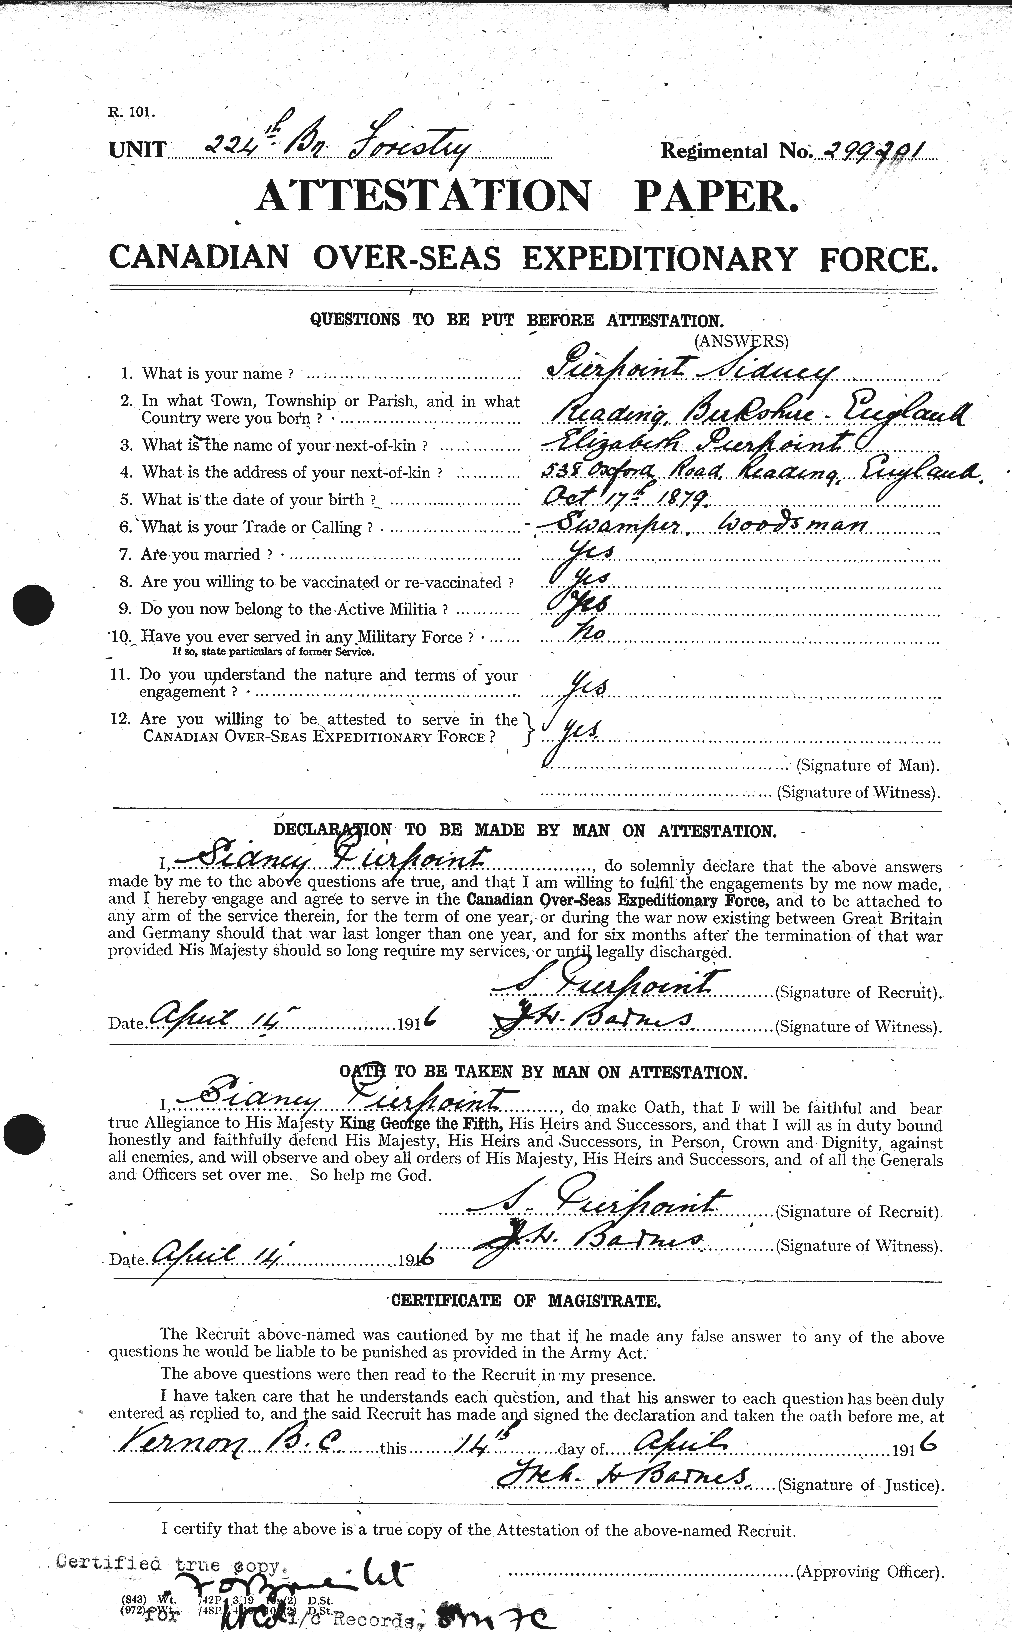 Personnel Records of the First World War - CEF 580940a